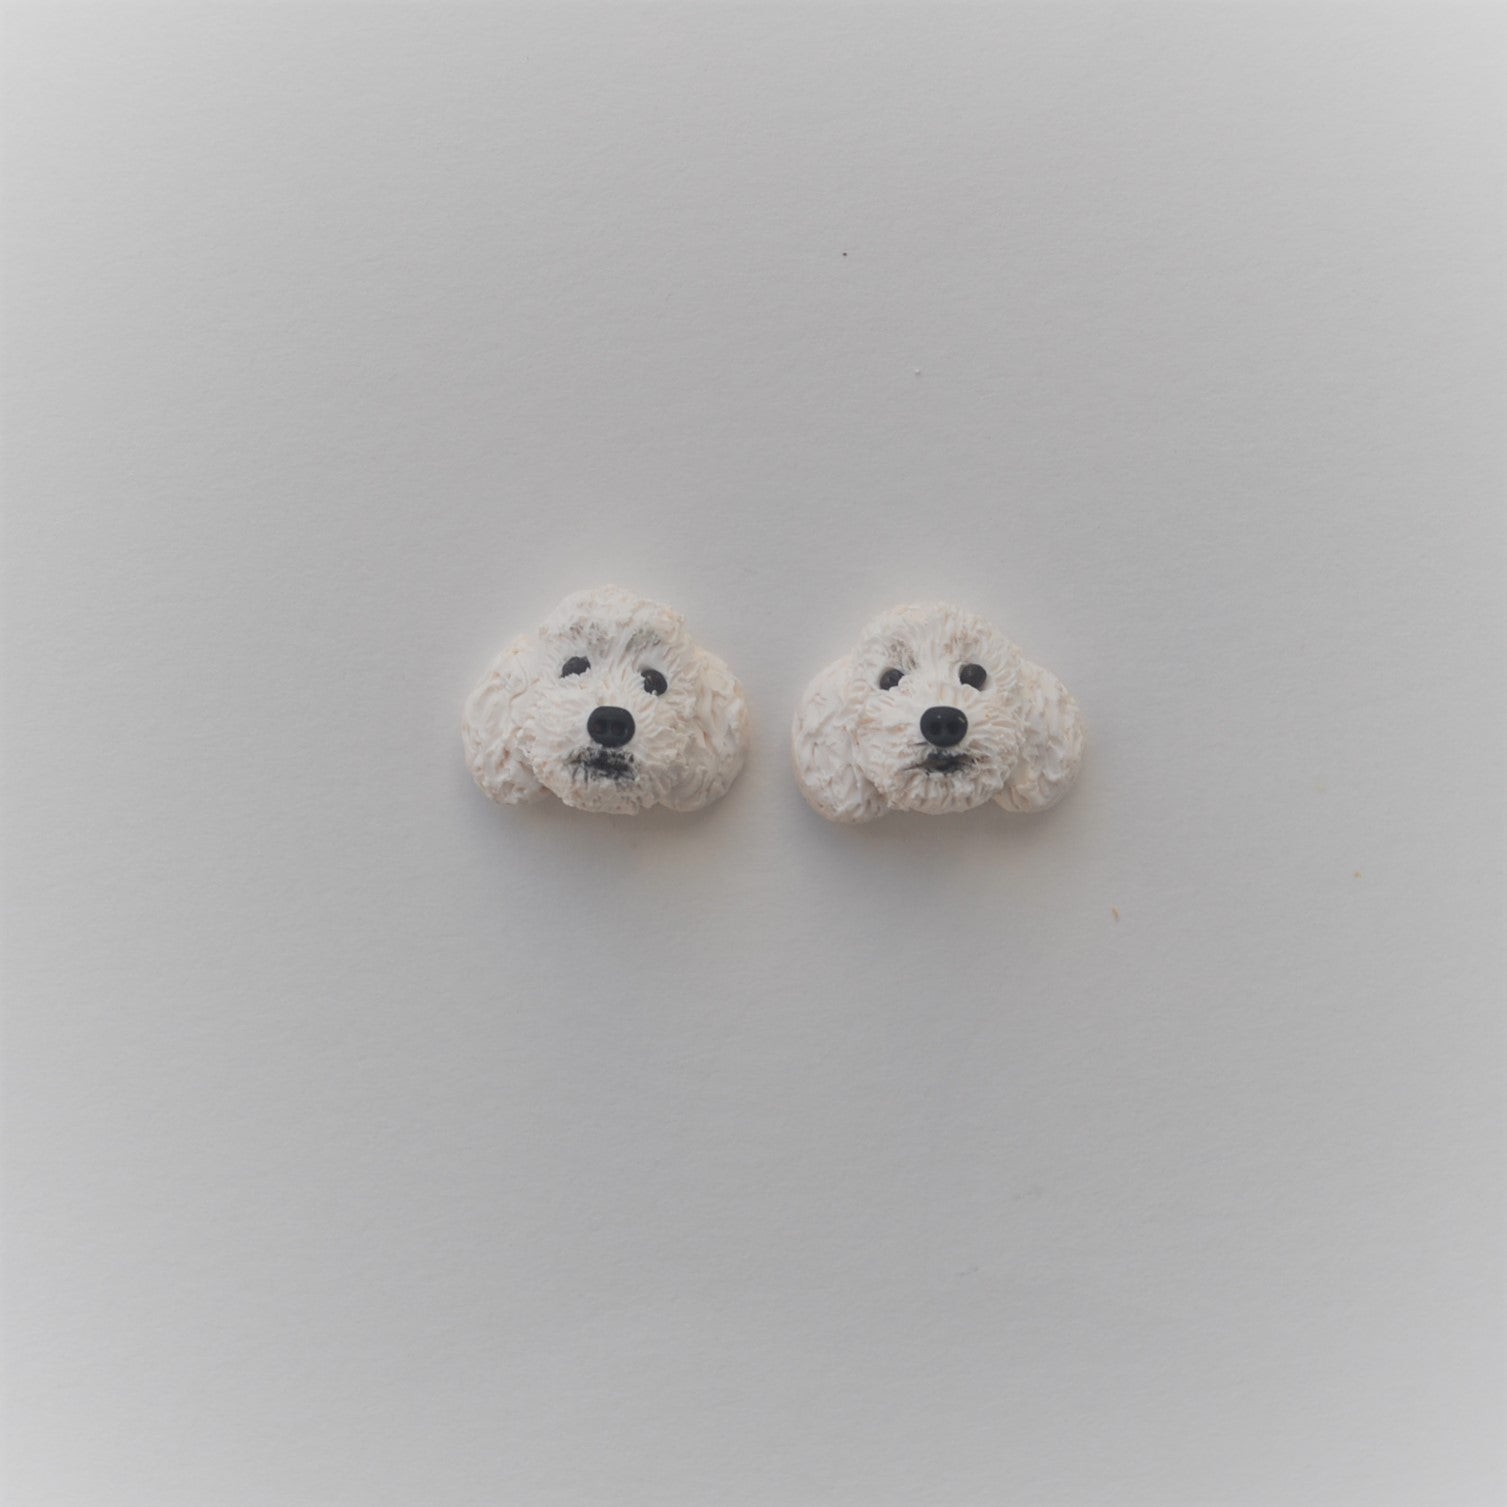 Handmade polymer clay white poodle stud earrings shown on white background